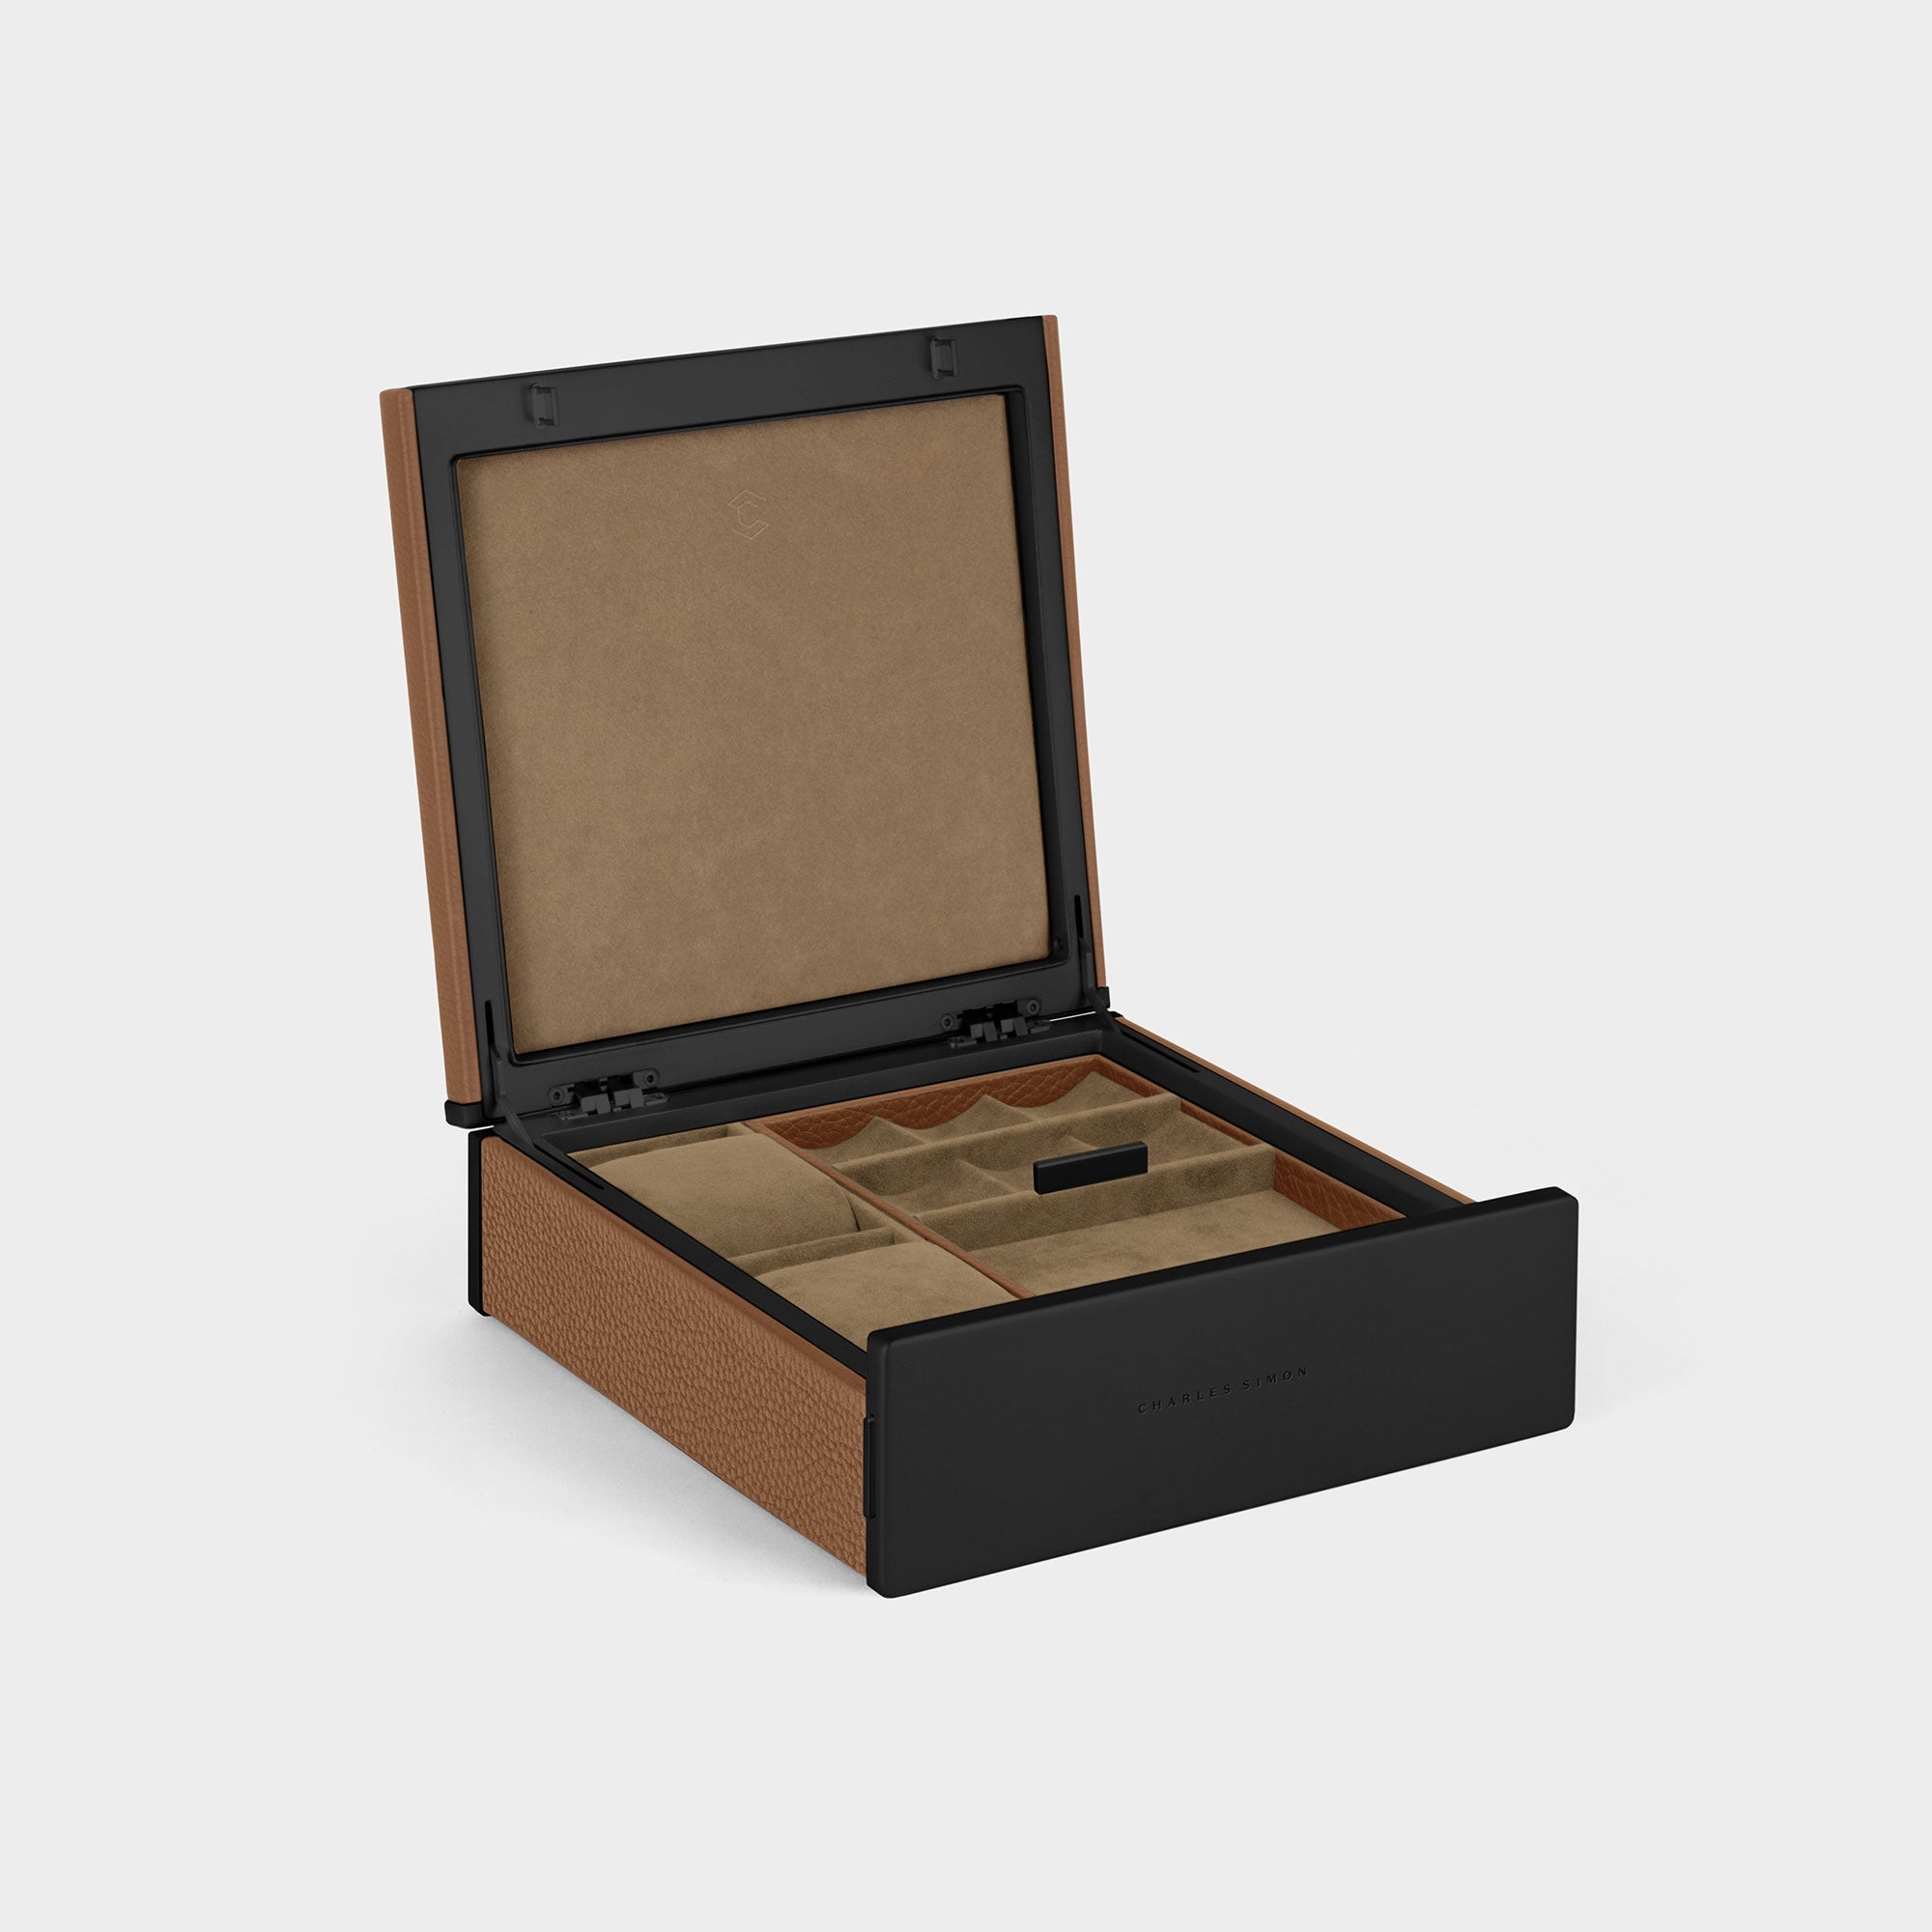 Product photo of open Taylor 2 Watch and Jewelry box in tan leather and camel interior showing jewelry storage compartments and two watch cushions